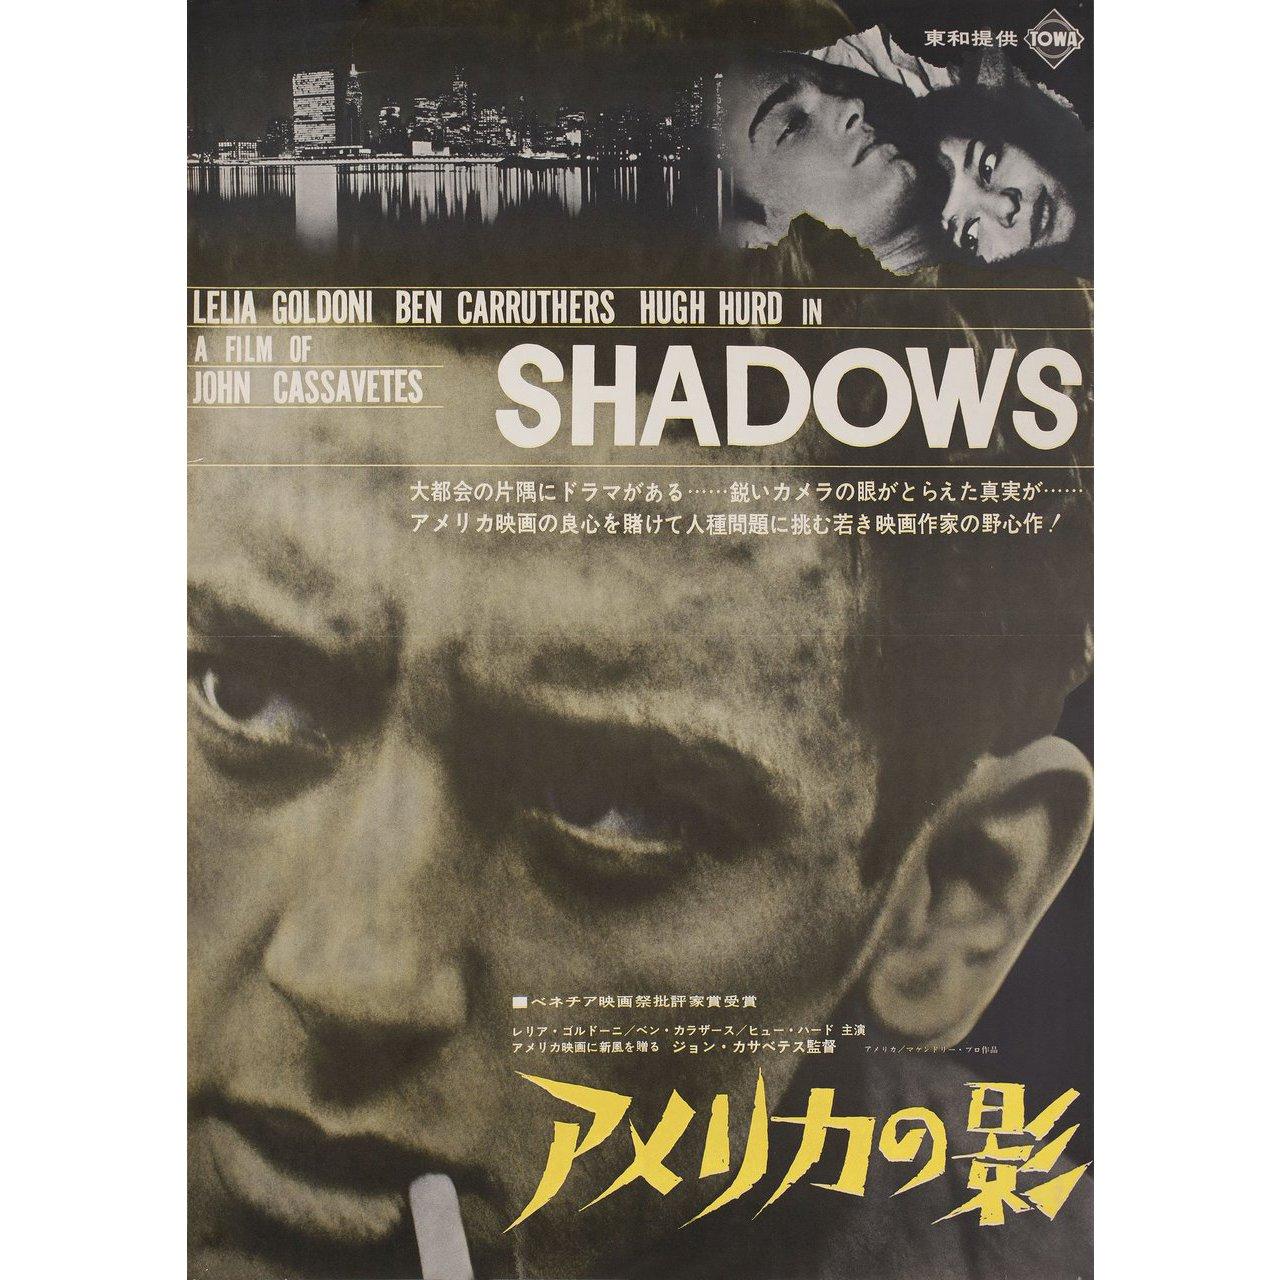 Original 1959 Japanese B2 poster for the film Shadows directed by John Cassavetes with Ben Carruthers / Lelia Goldoni / Hugh Hurd / Anthony Ray. Very Good-Fine condition, folded. Many original posters were issued folded or were subsequently folded.